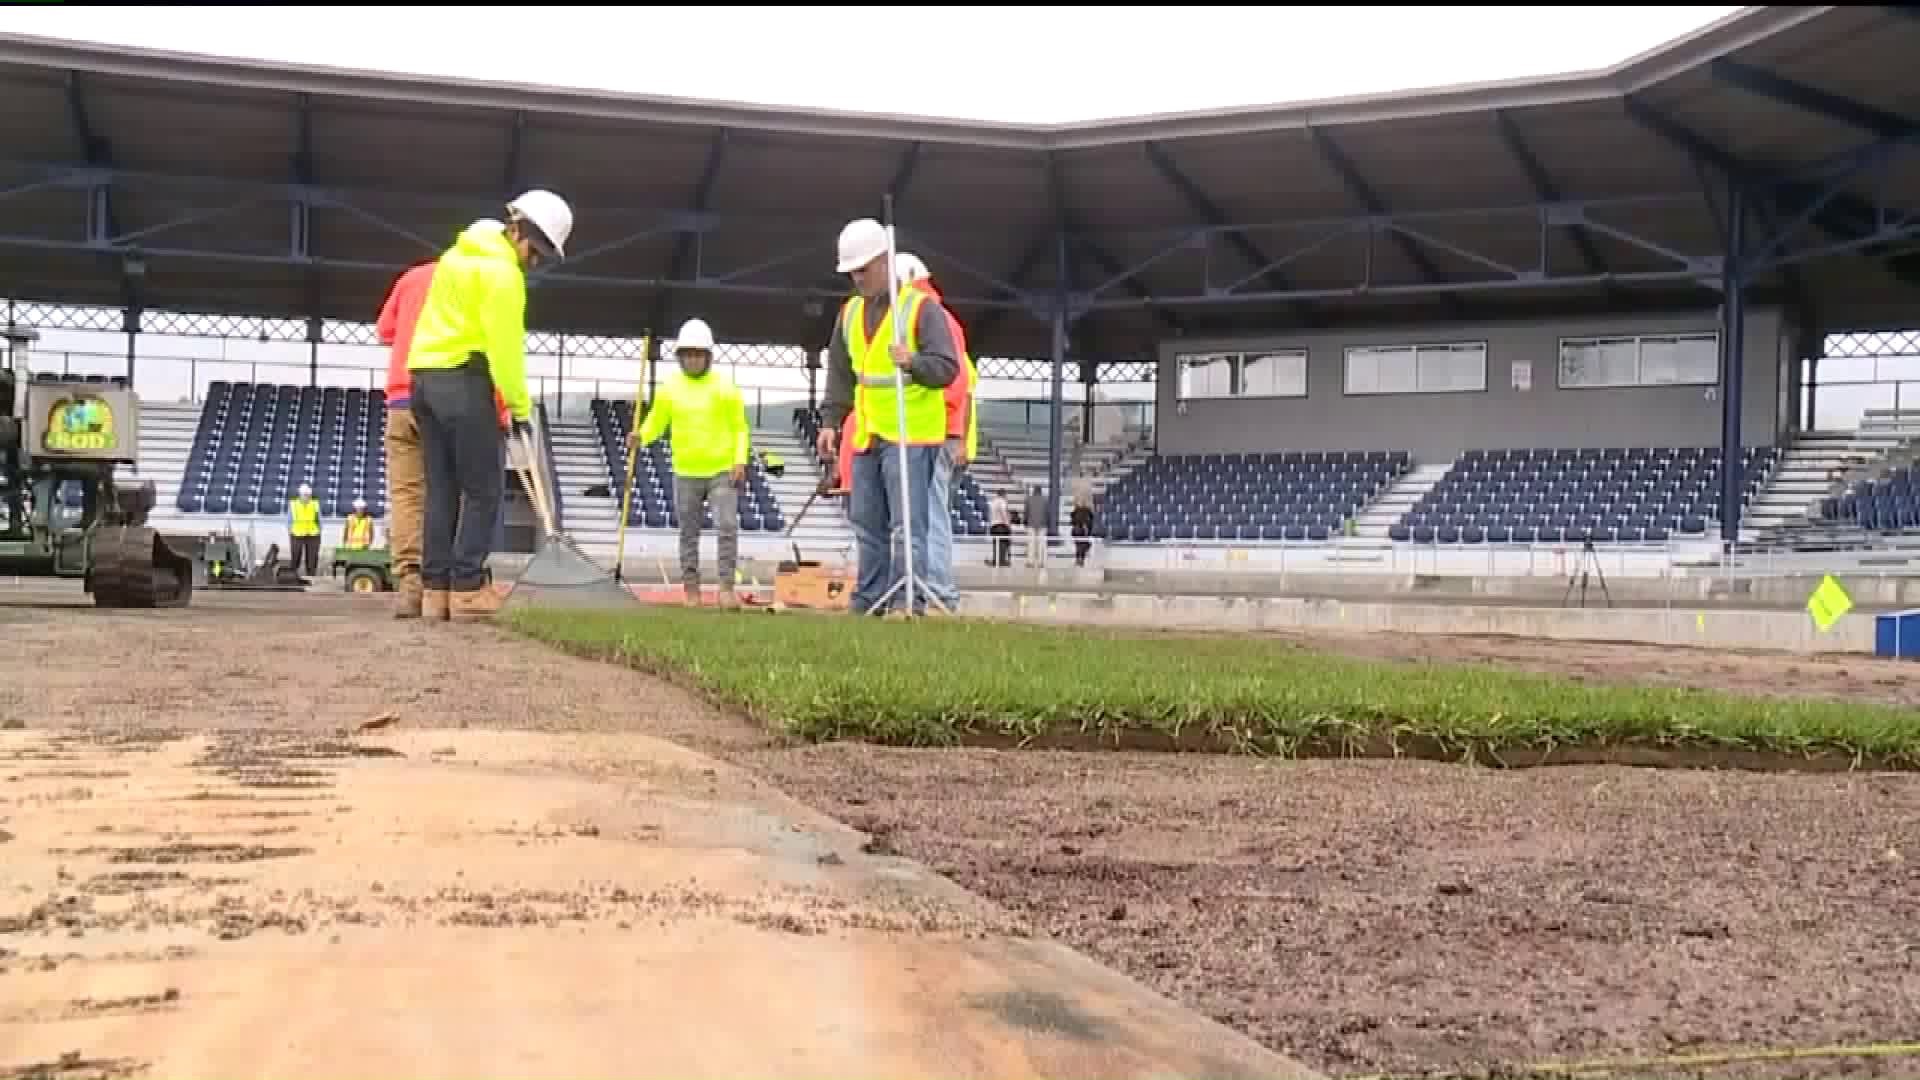 From Sand to Sod: Historic Bowman Field Gets Upgrade